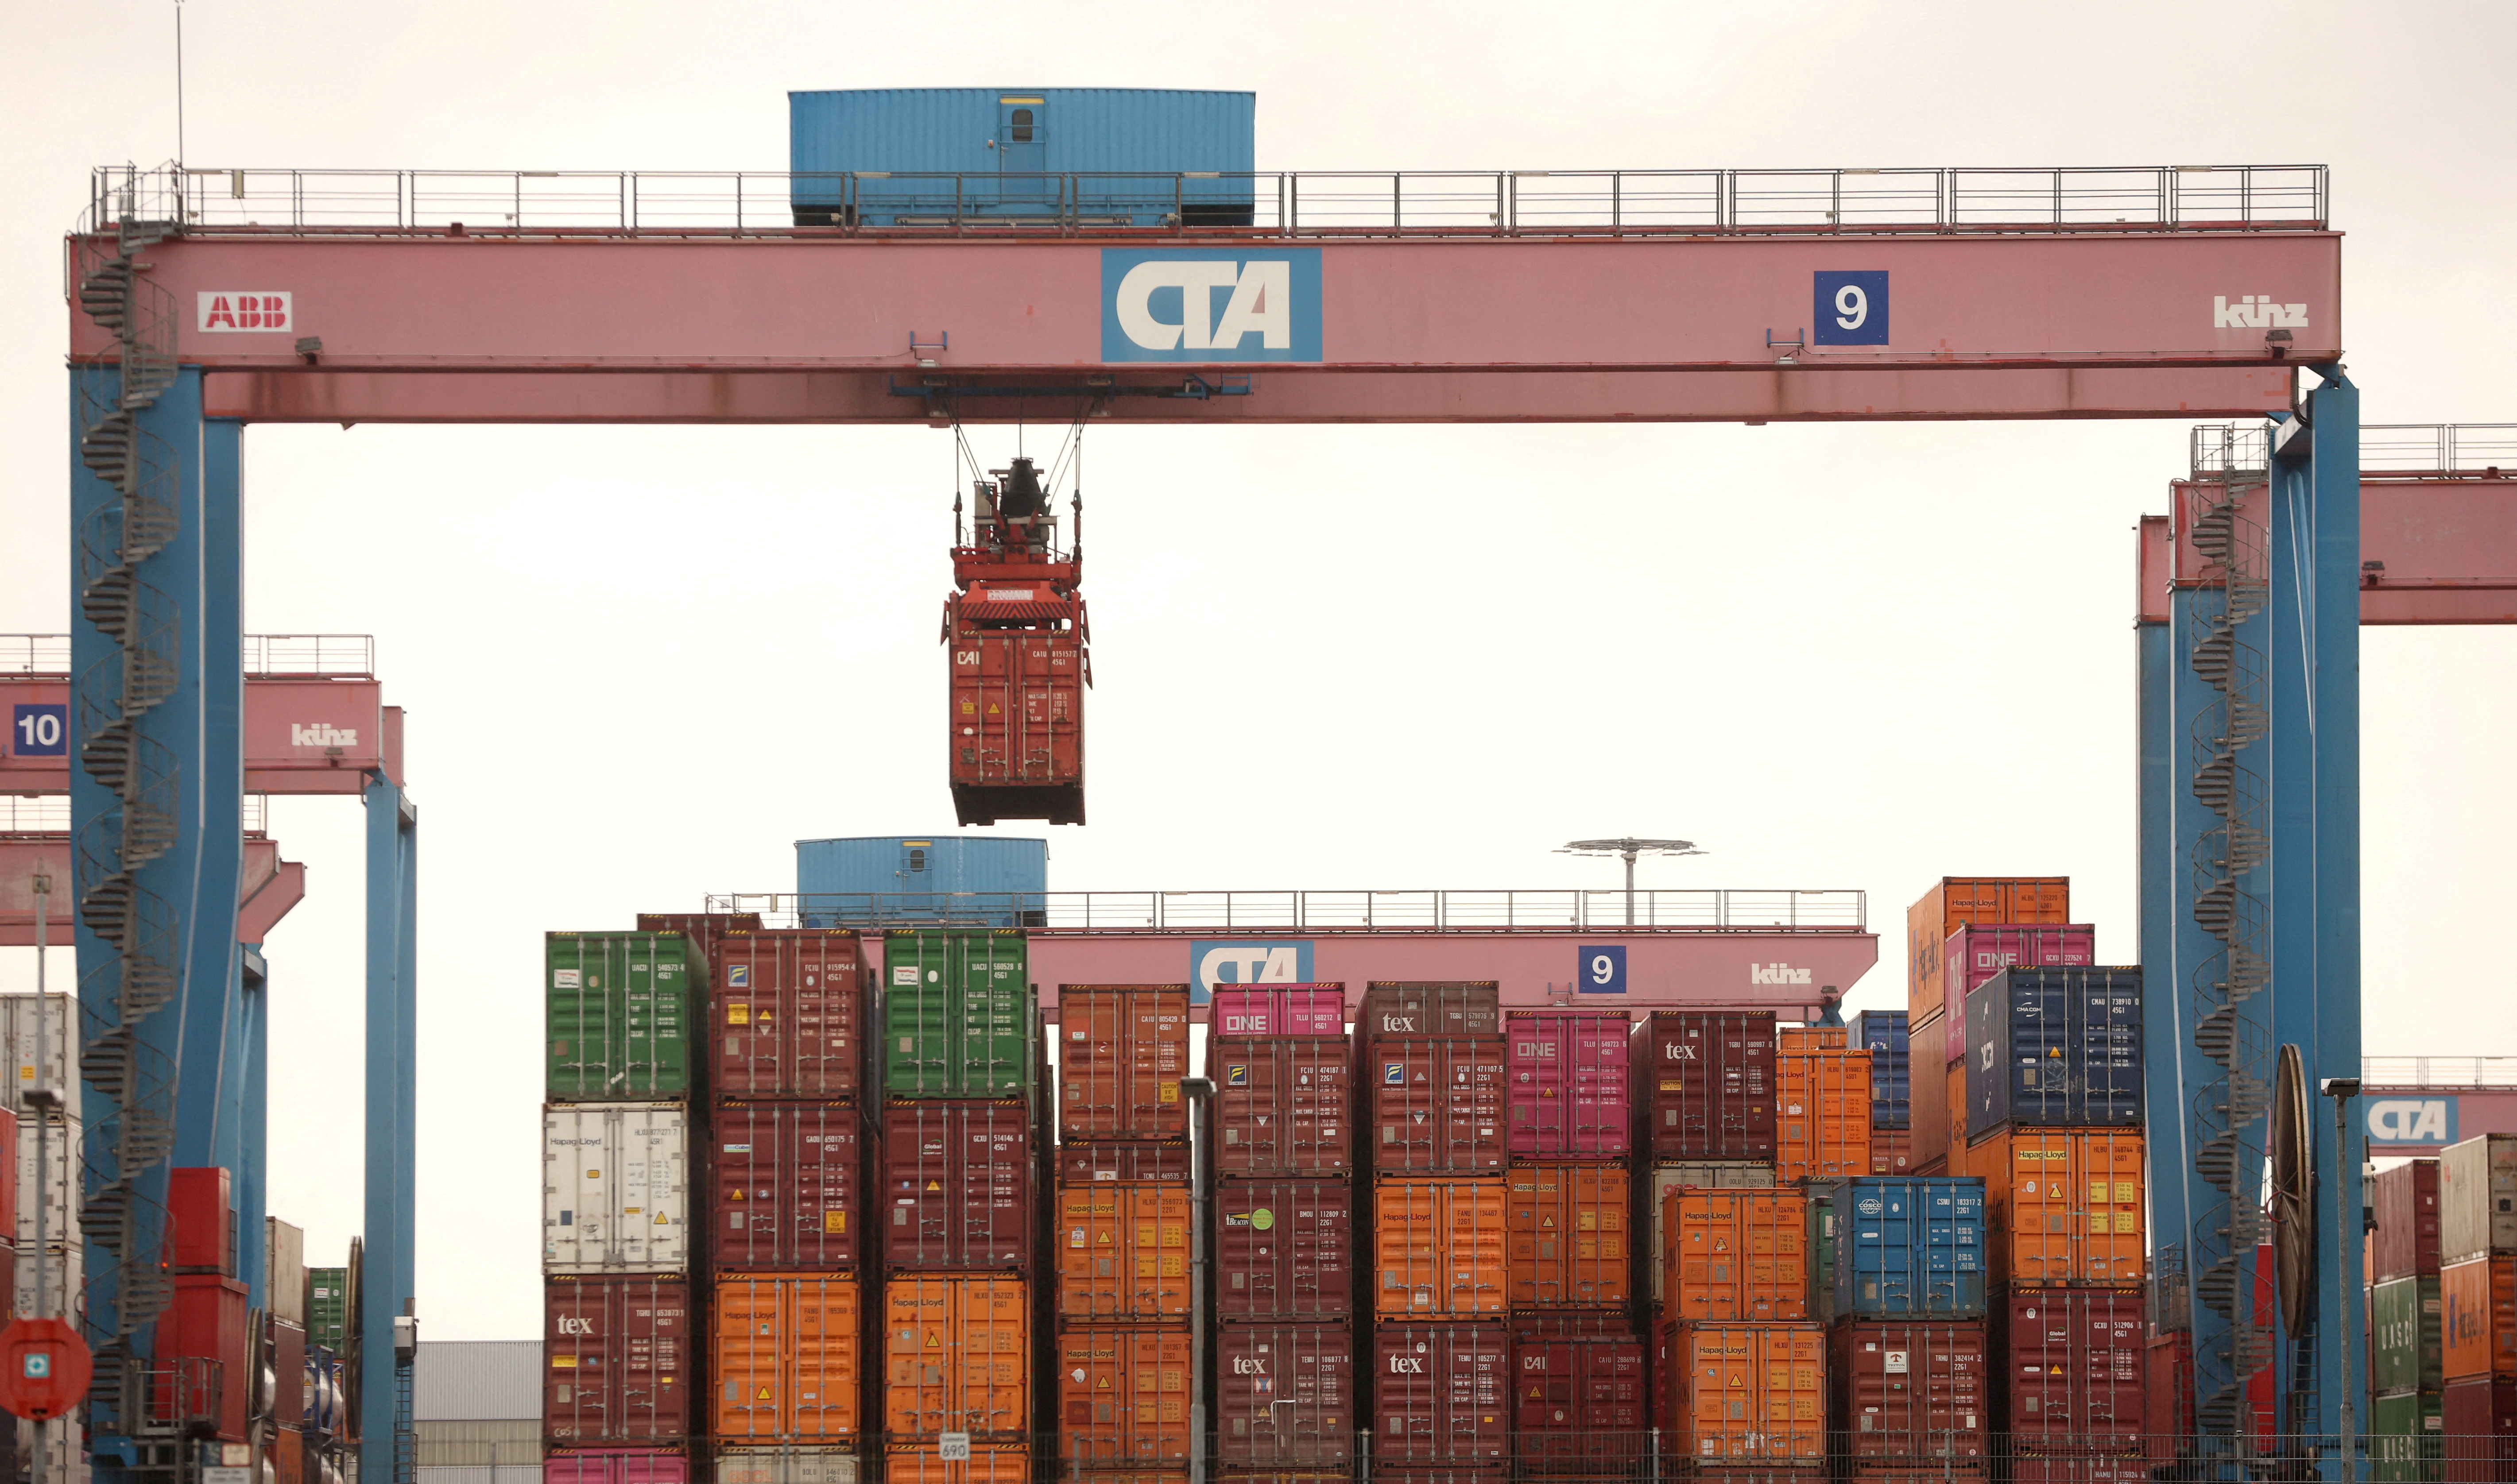 A crane lifts a shipping container at the HHLA Container Terminal Altenwerder on the Elbe River in Hamburg, Germany.